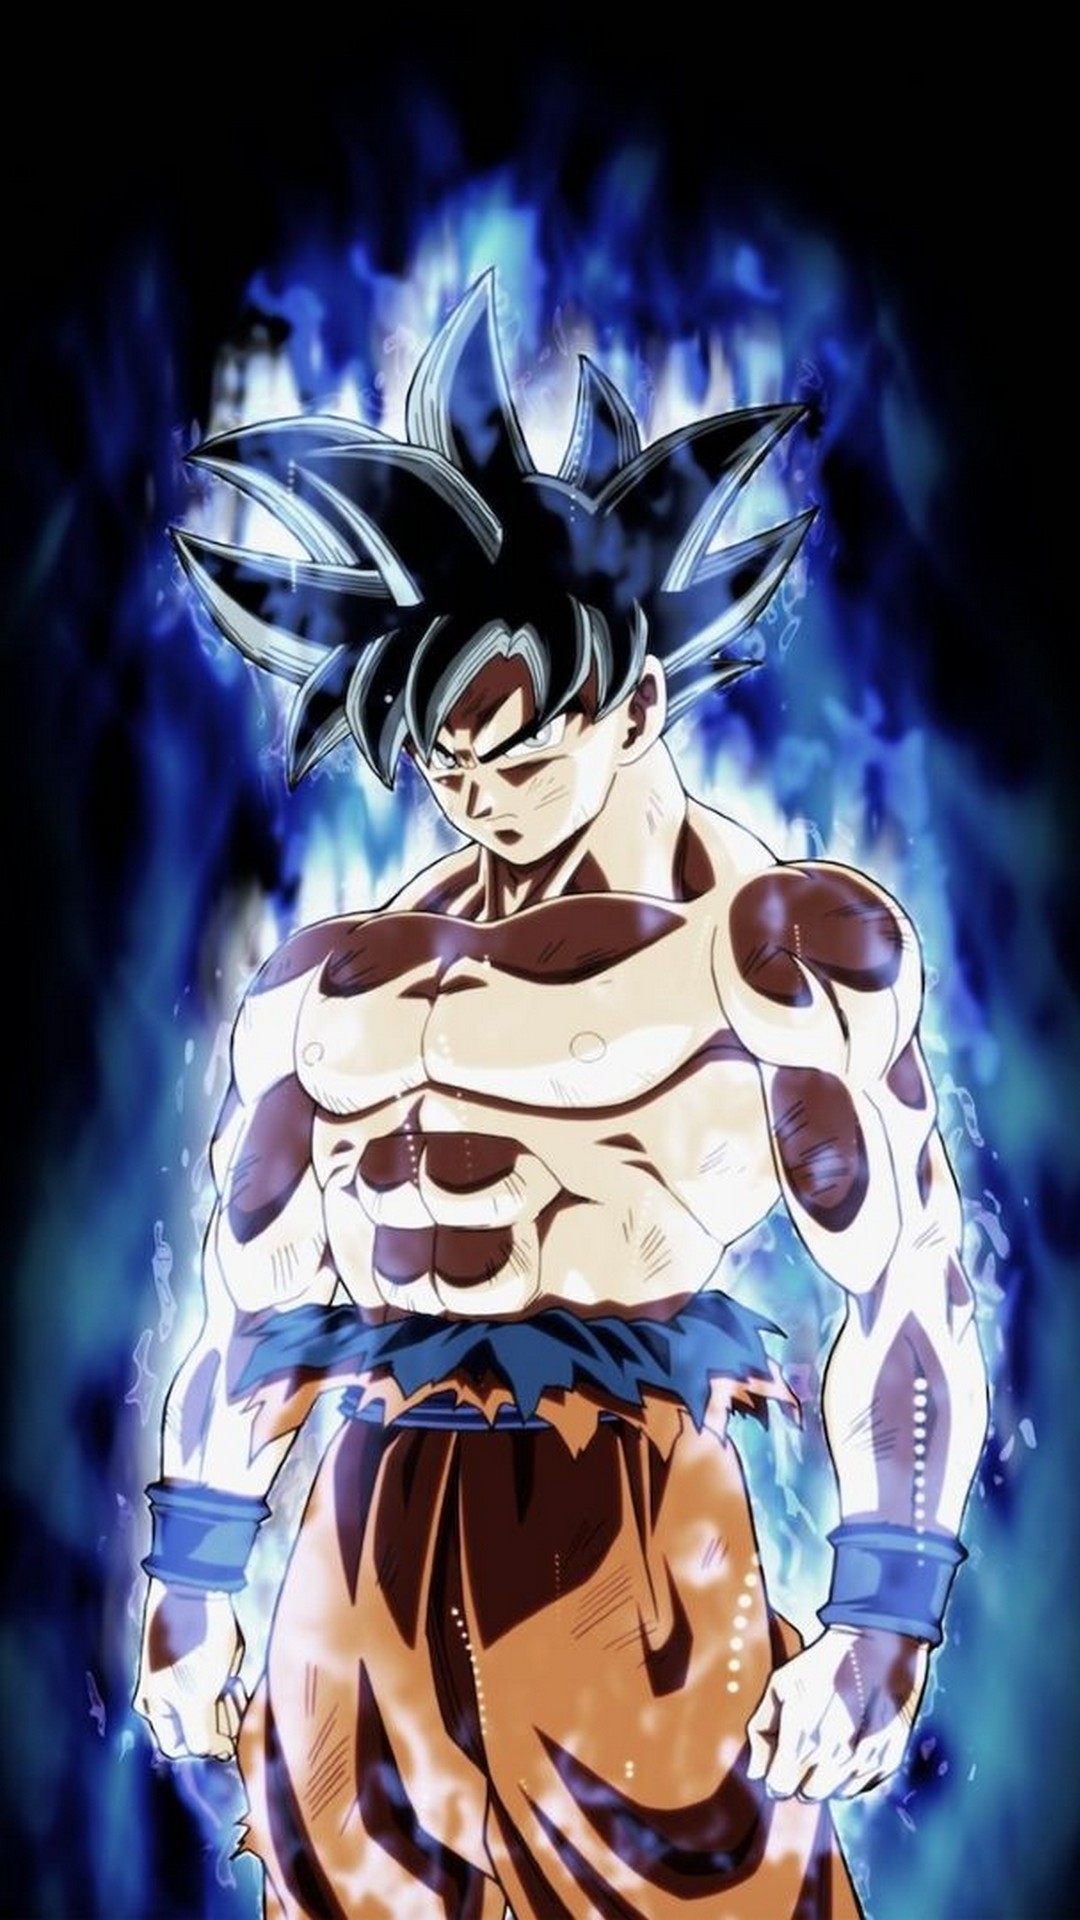 Wallpaper iPhone Goku Images with image resolution 1080x1920 pixel. You can make this wallpaper for your iPhone 5, 6, 7, 8, X backgrounds, Mobile Screensaver, or iPad Lock Screen